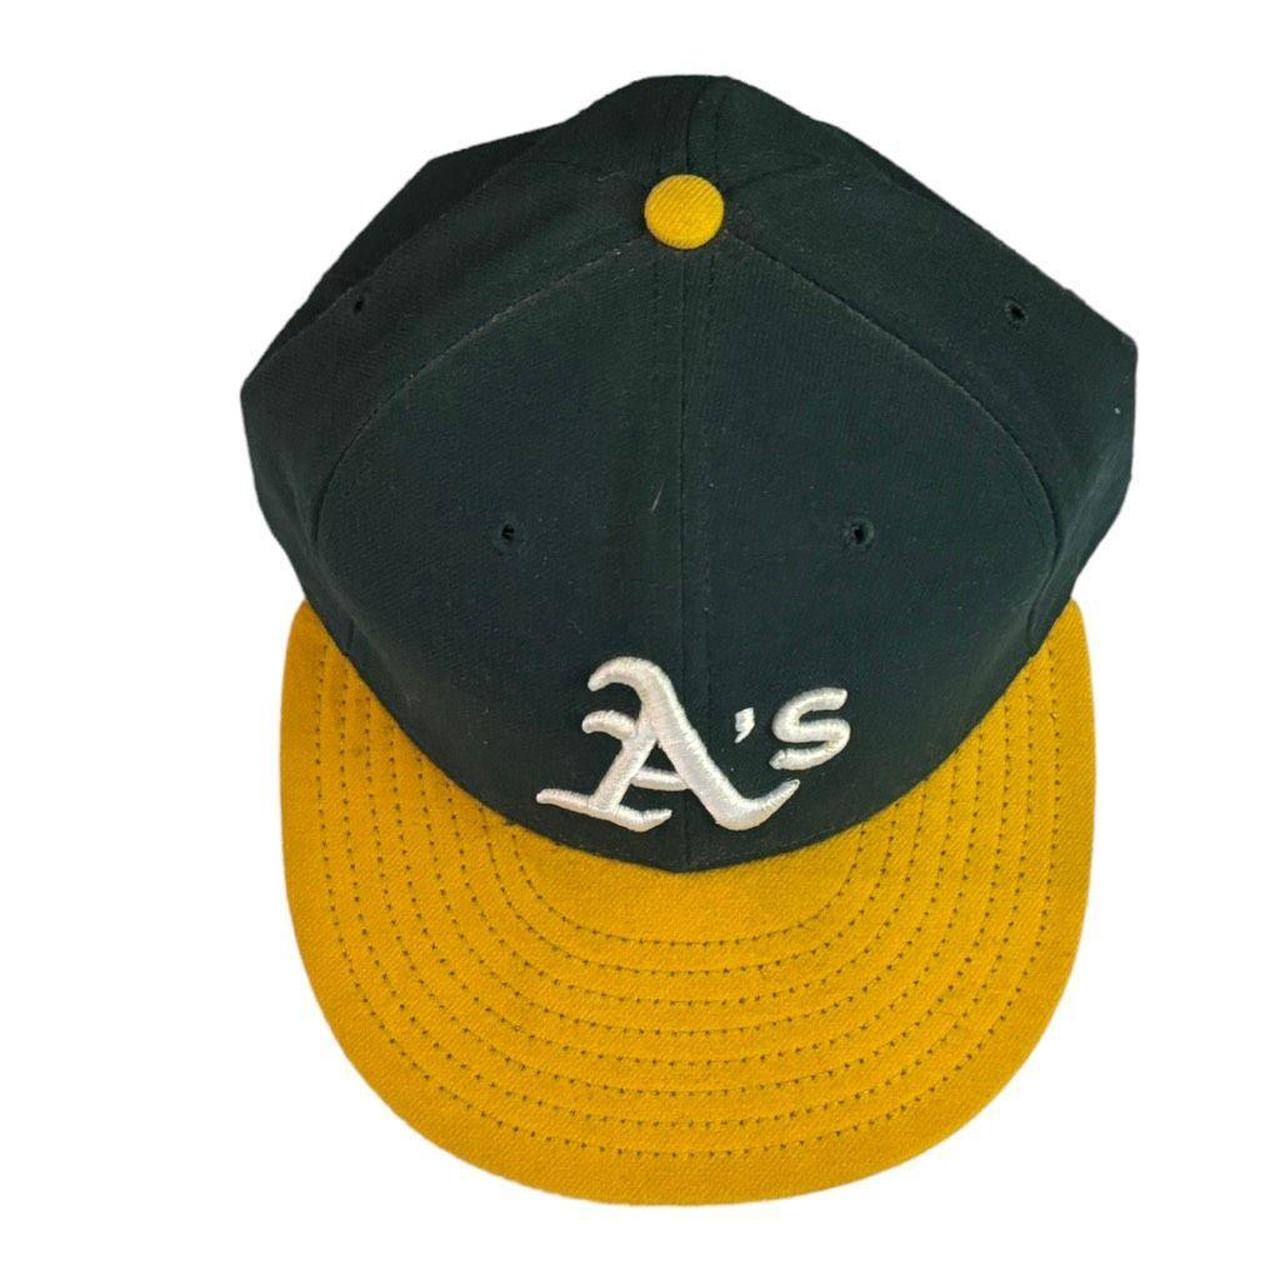 Vintage Oakland A's Fitted Hat New Era Tag Size 7 - Depop